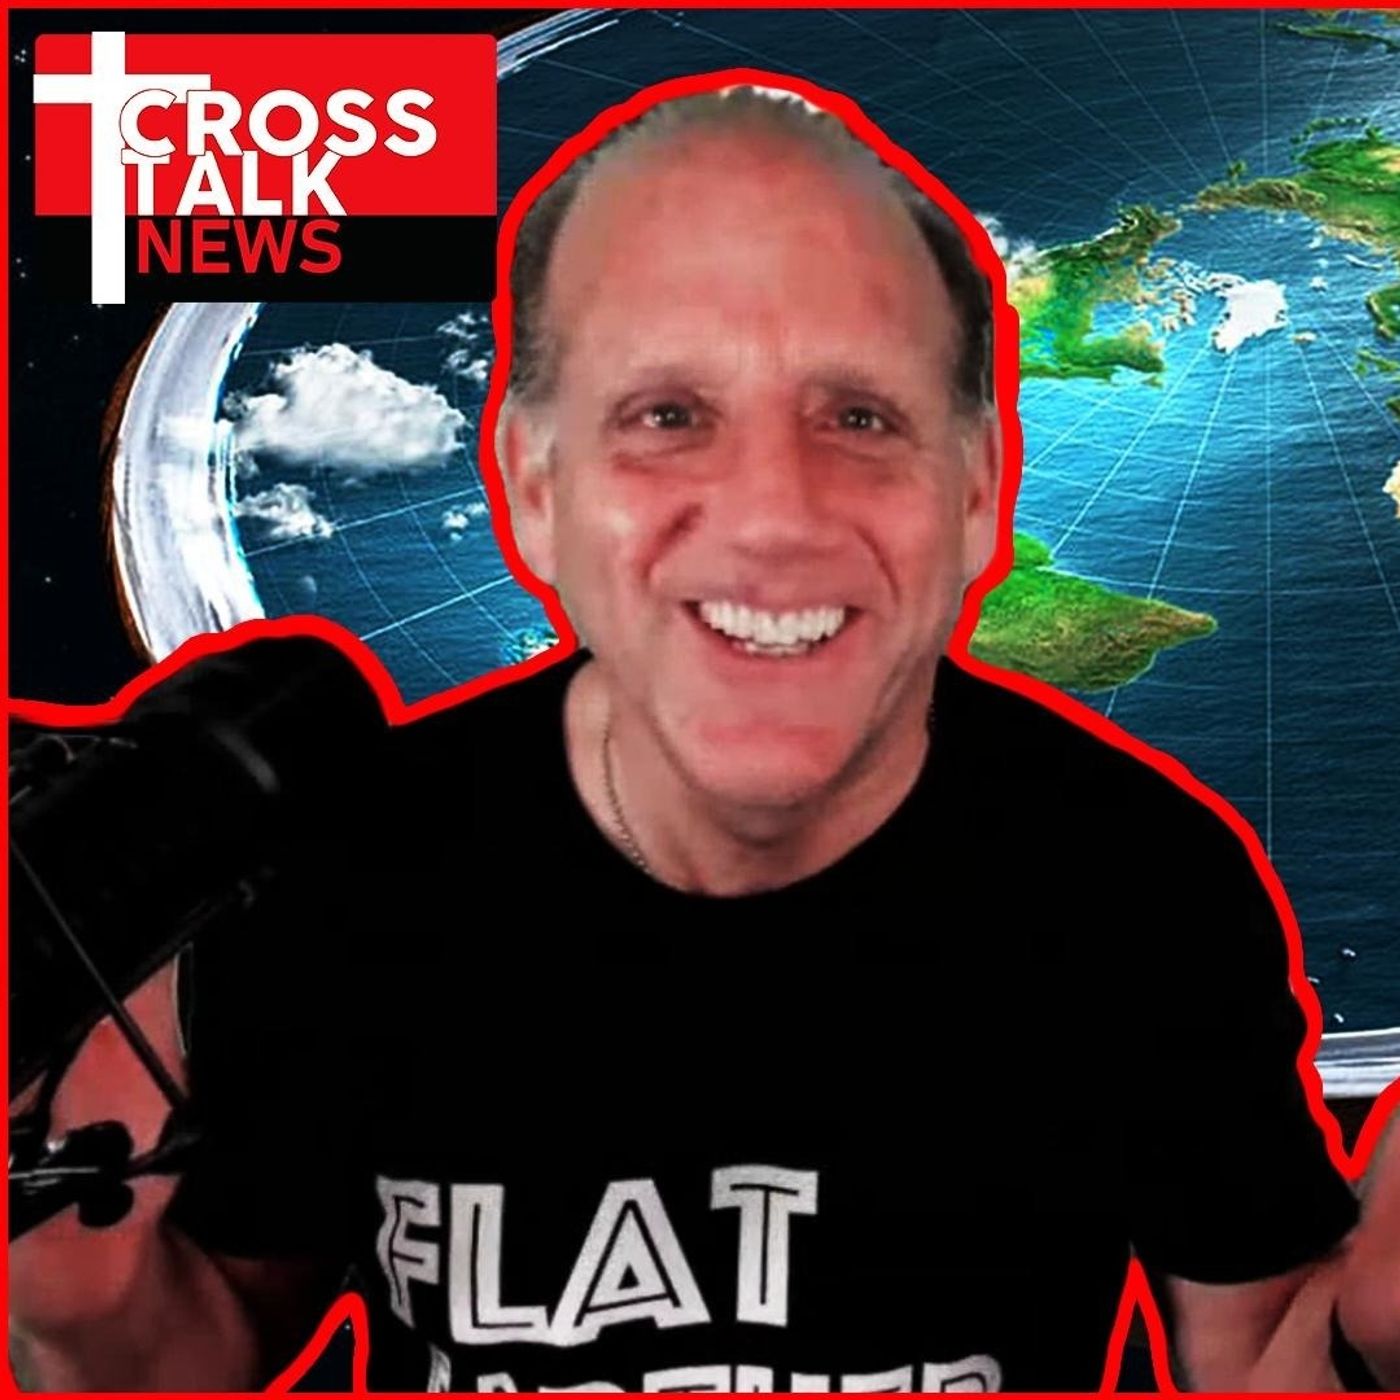 The Earth is FLAT?! Dave Weiss Makes Compelling Case For Flat Earth Theory